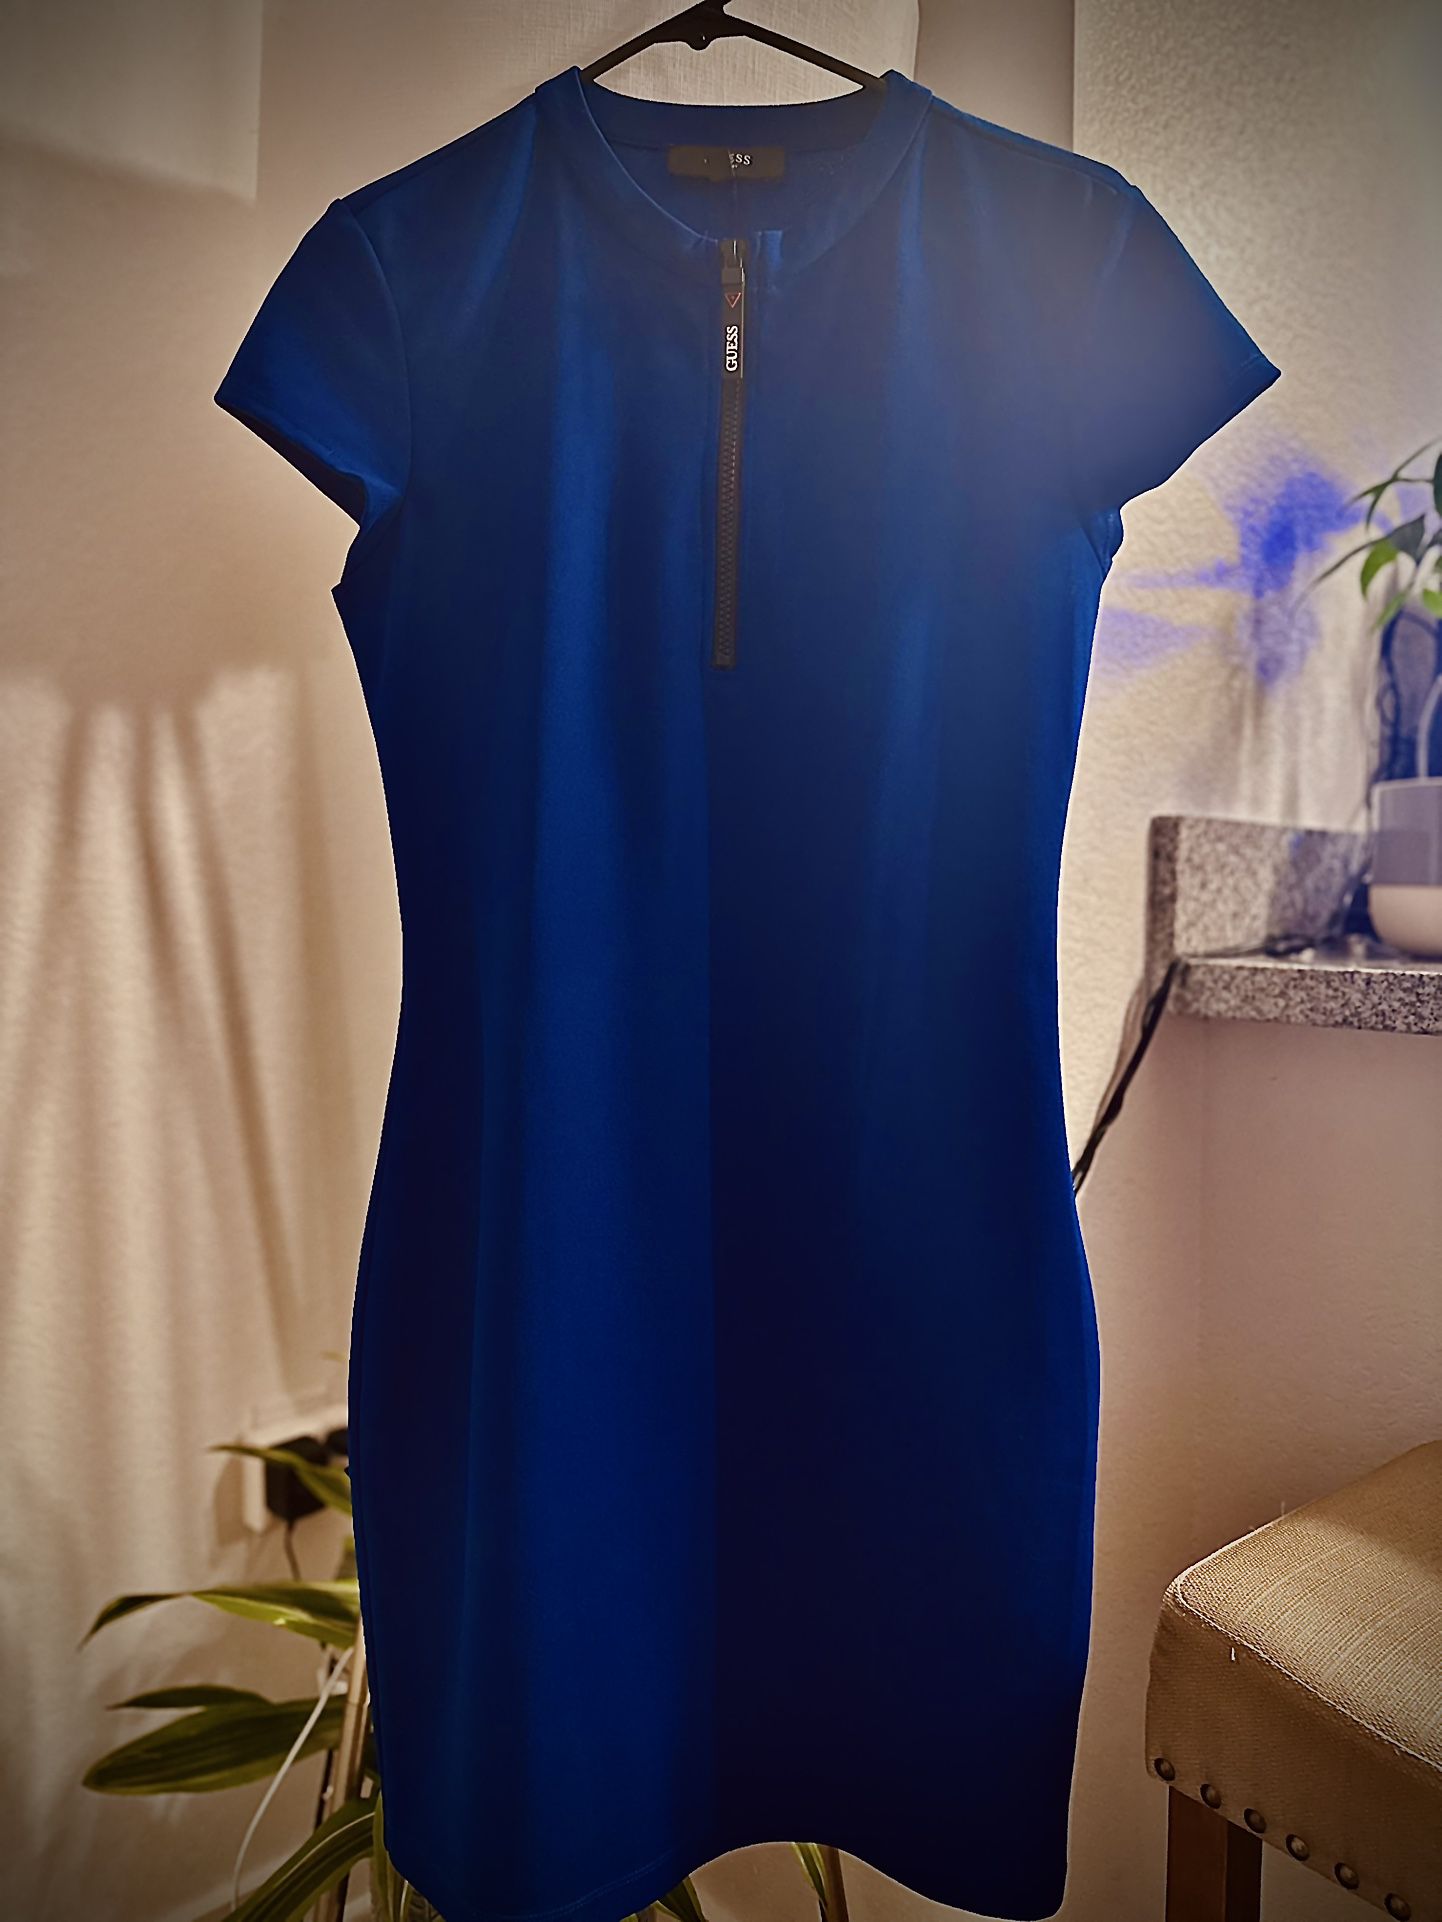 Royal blue slinky Guess Dress perfect for A Scottsdale Evening.